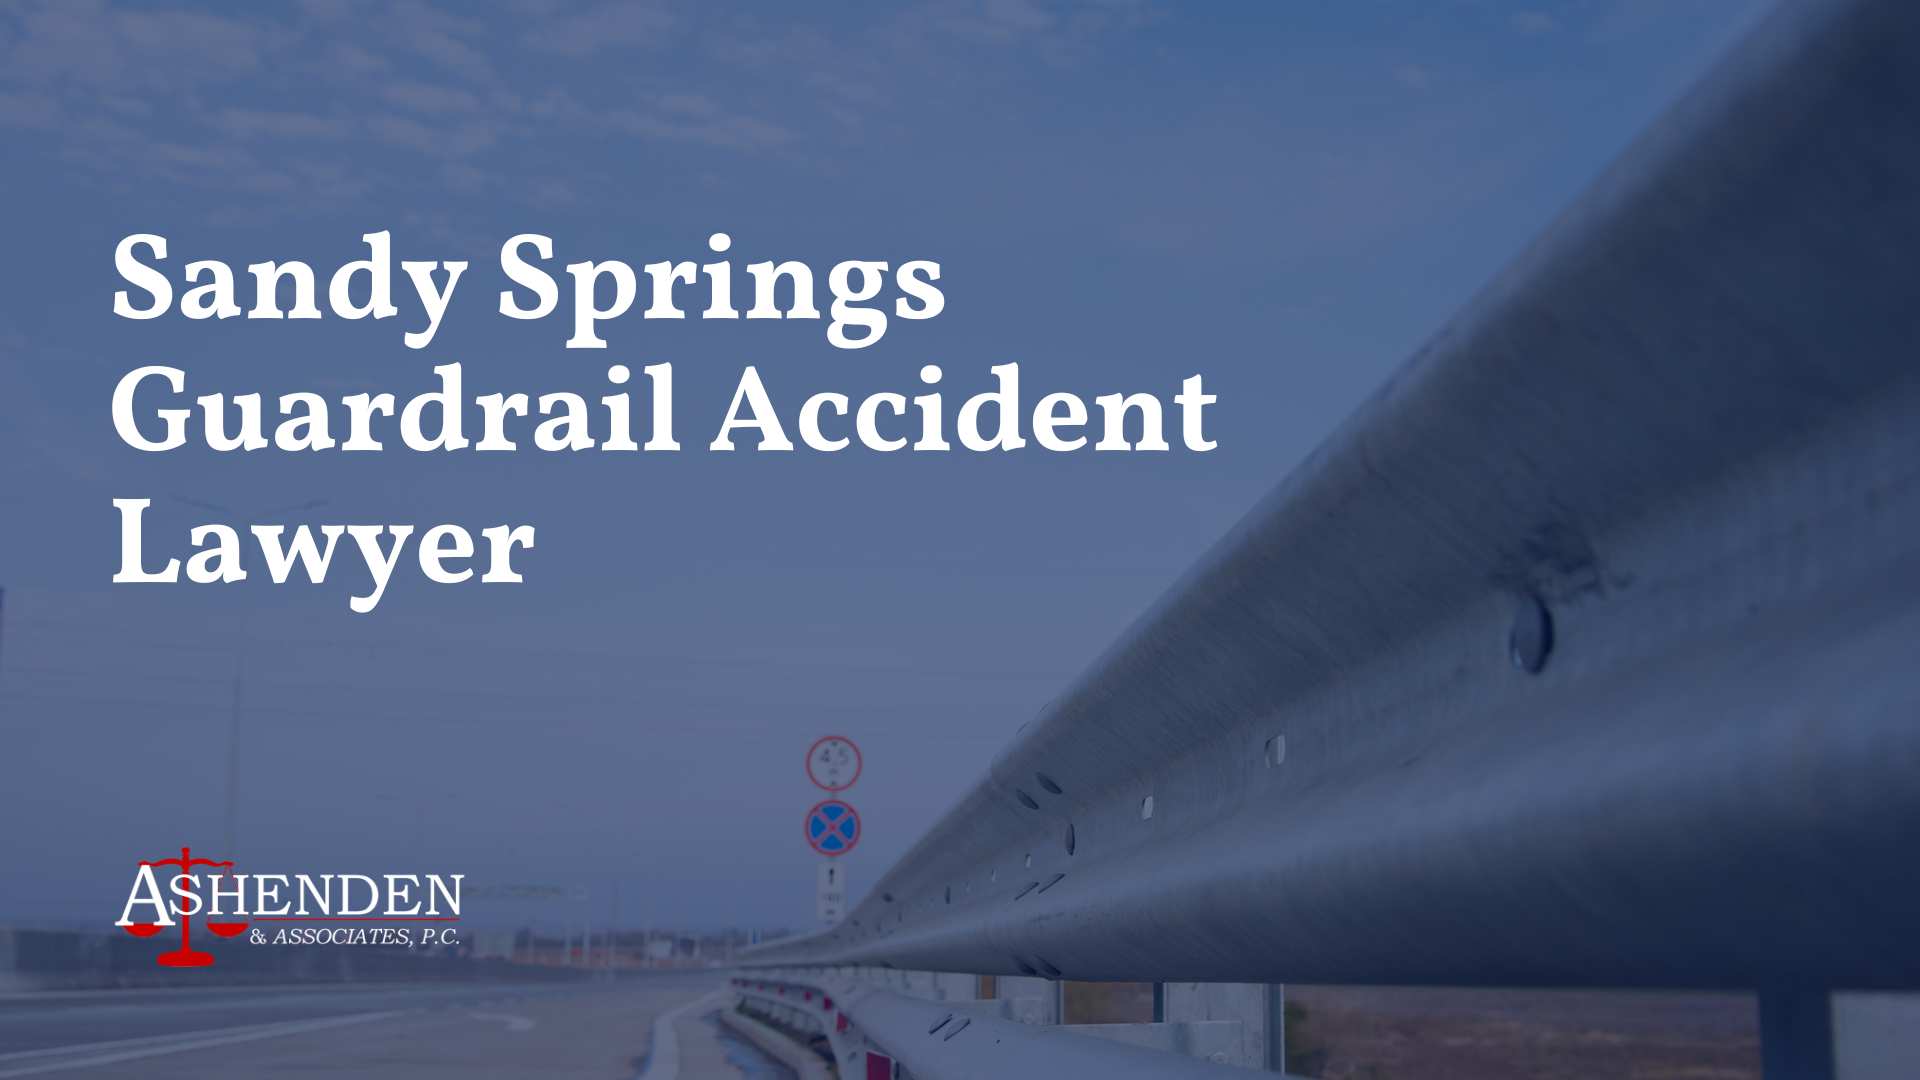 Sandy Springs Guardrail Accident Lawyer